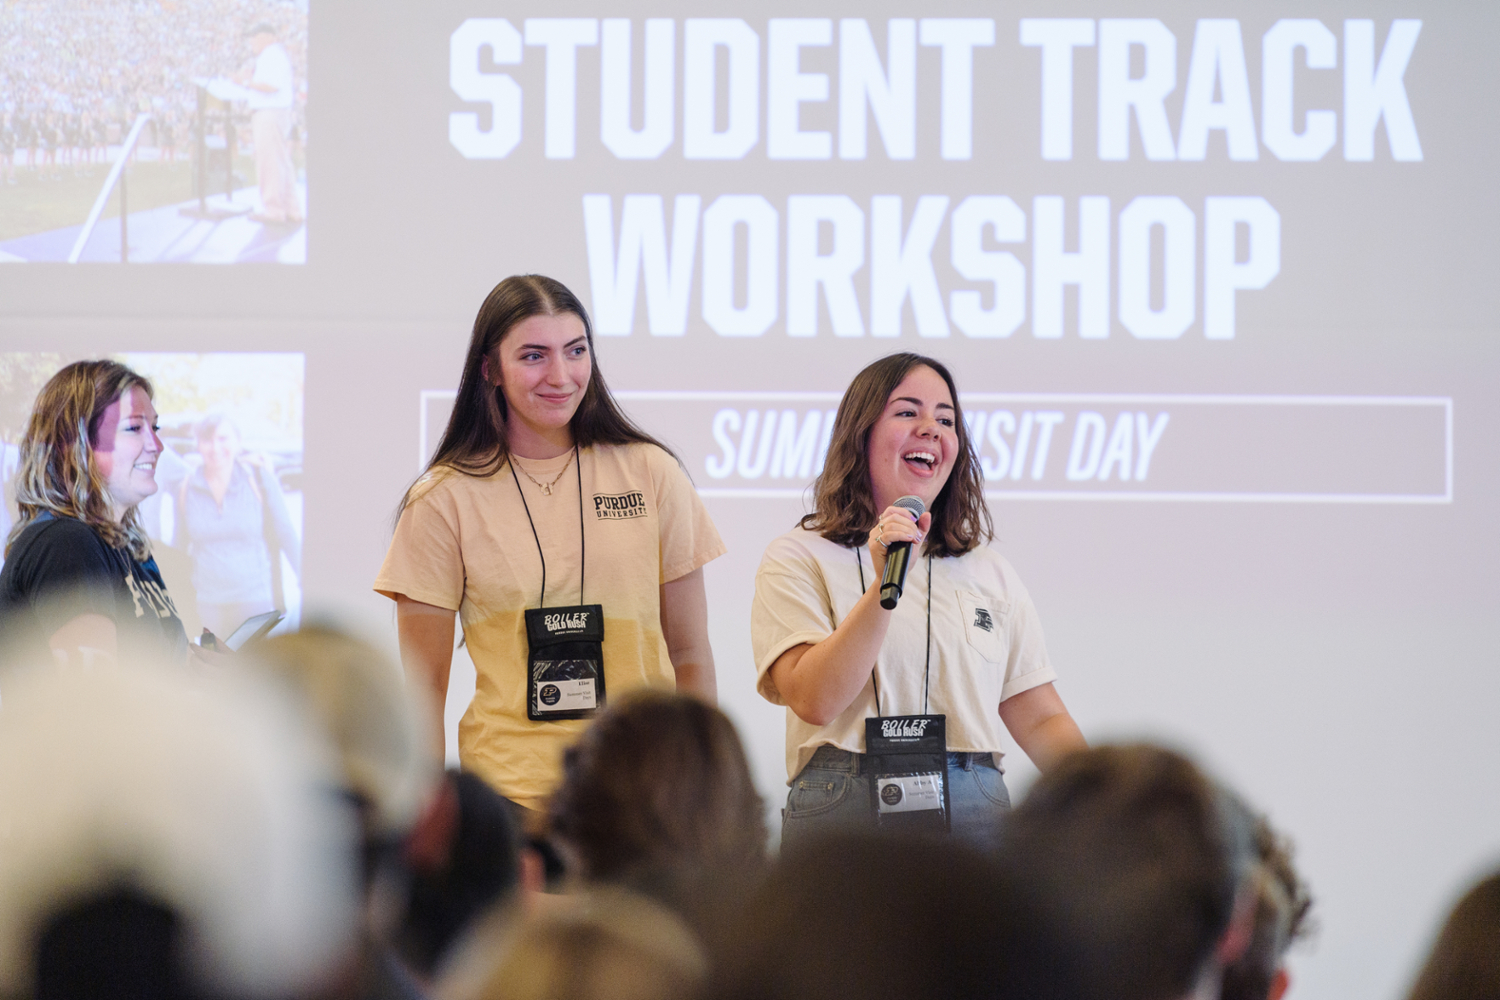 pictured: two students stand by a projector and talk during an s.v.d. presentation